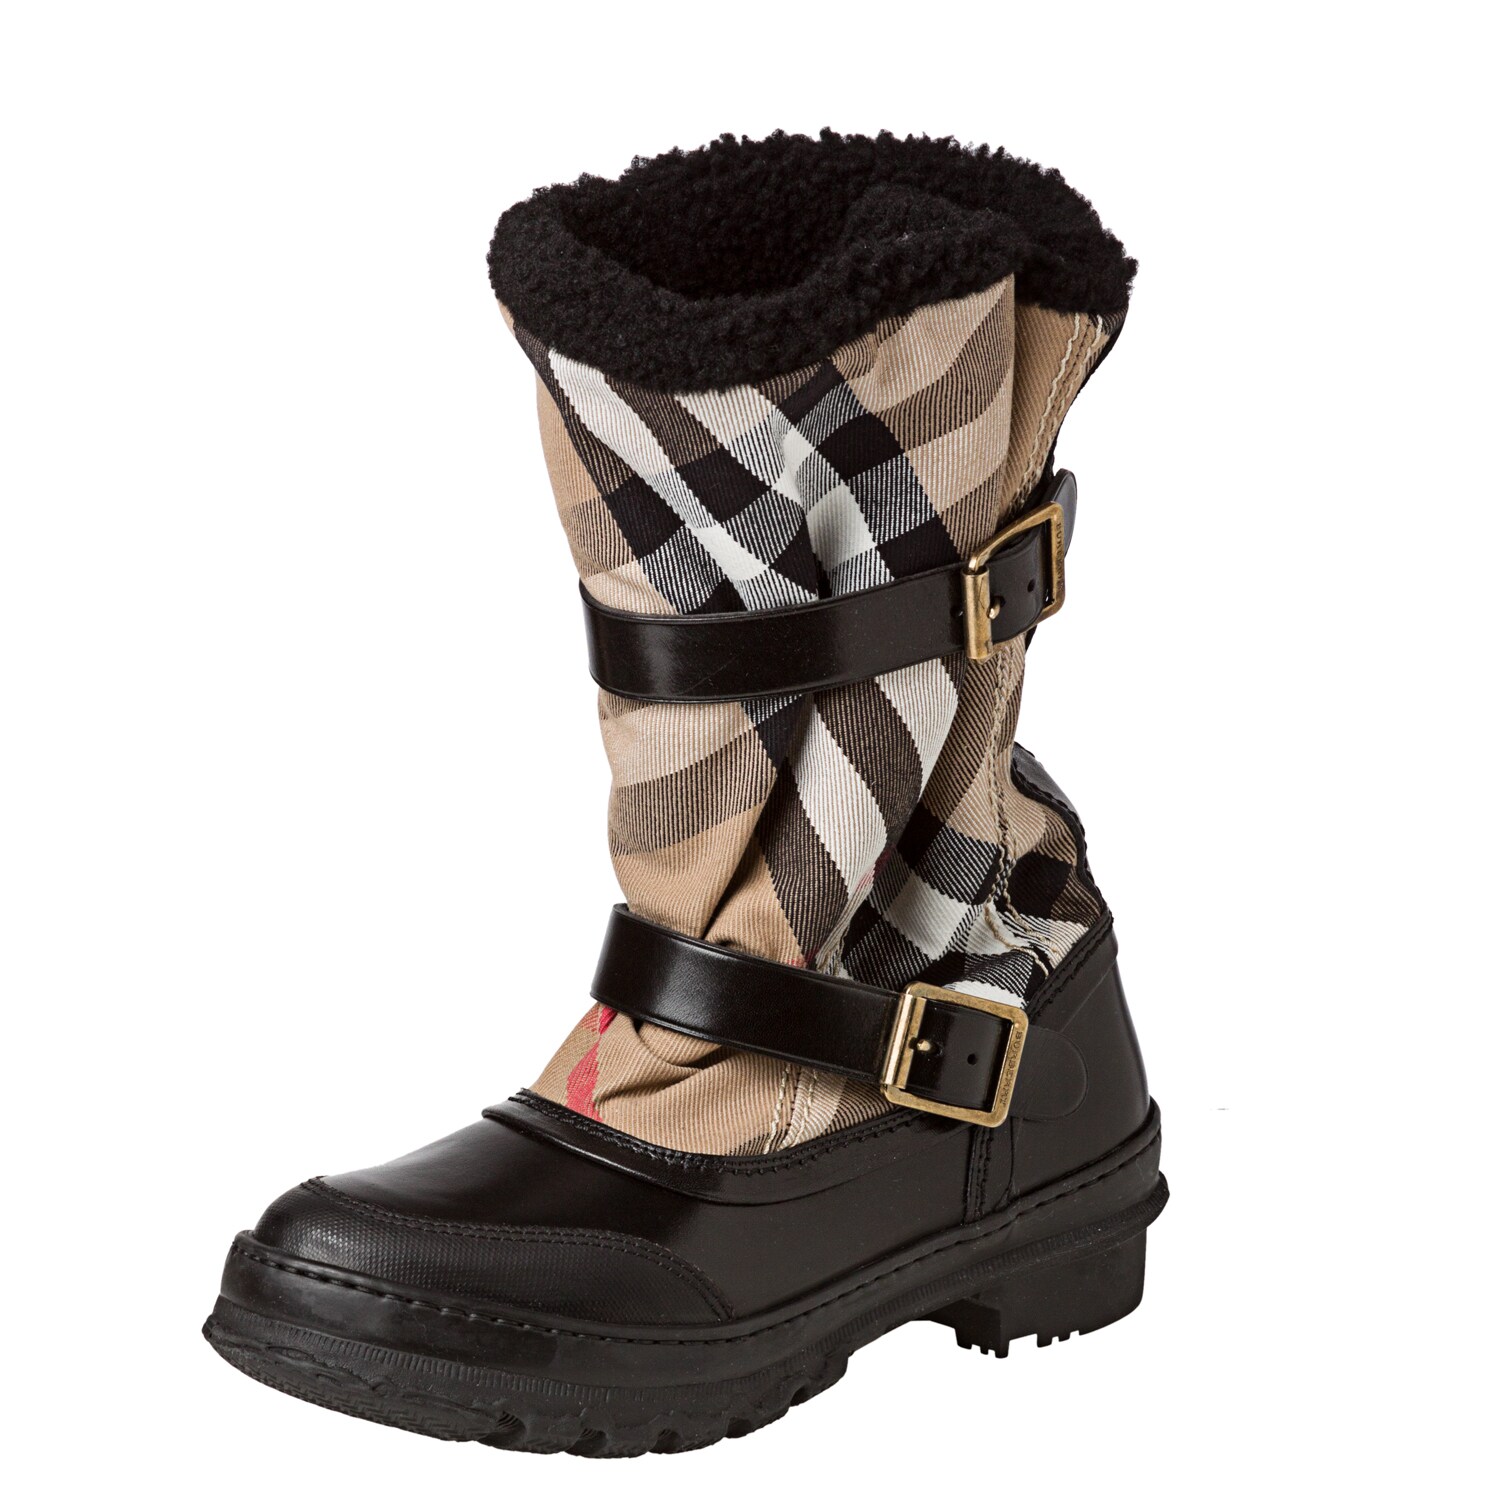 burberry house check snow boots